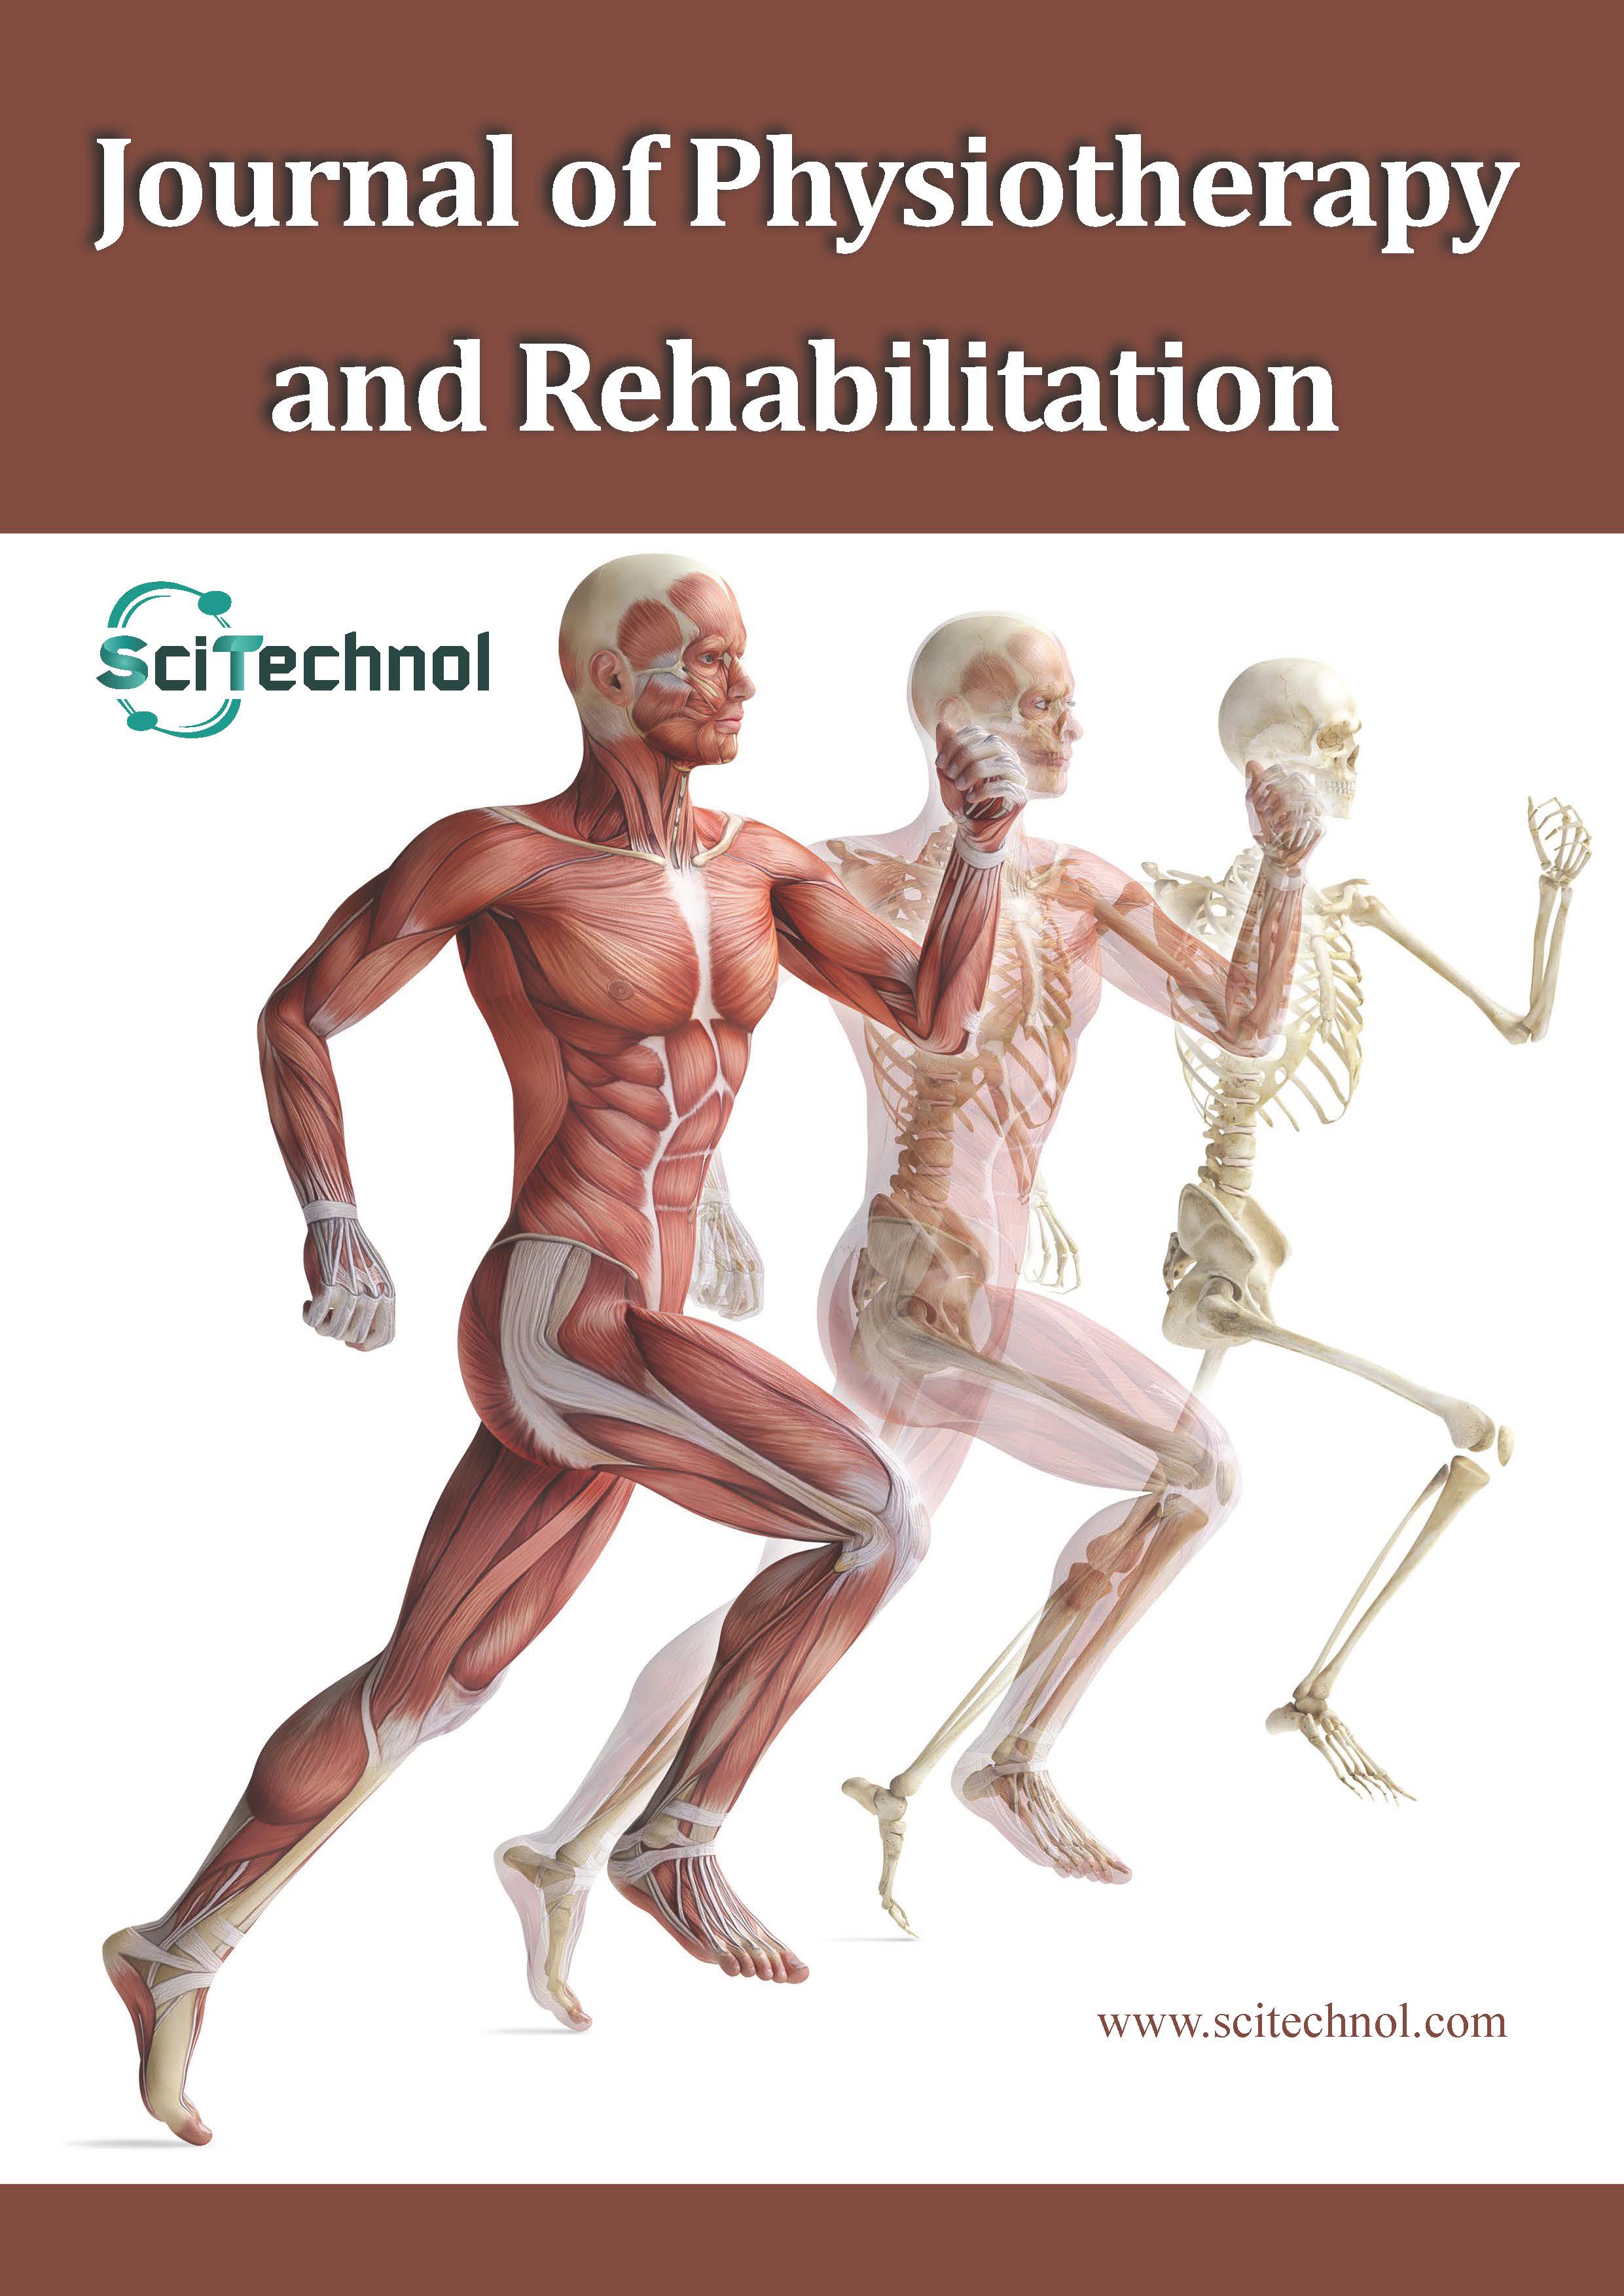 Journal-of-Physiotherapy-and-Rehabilitation-flyer.jpg